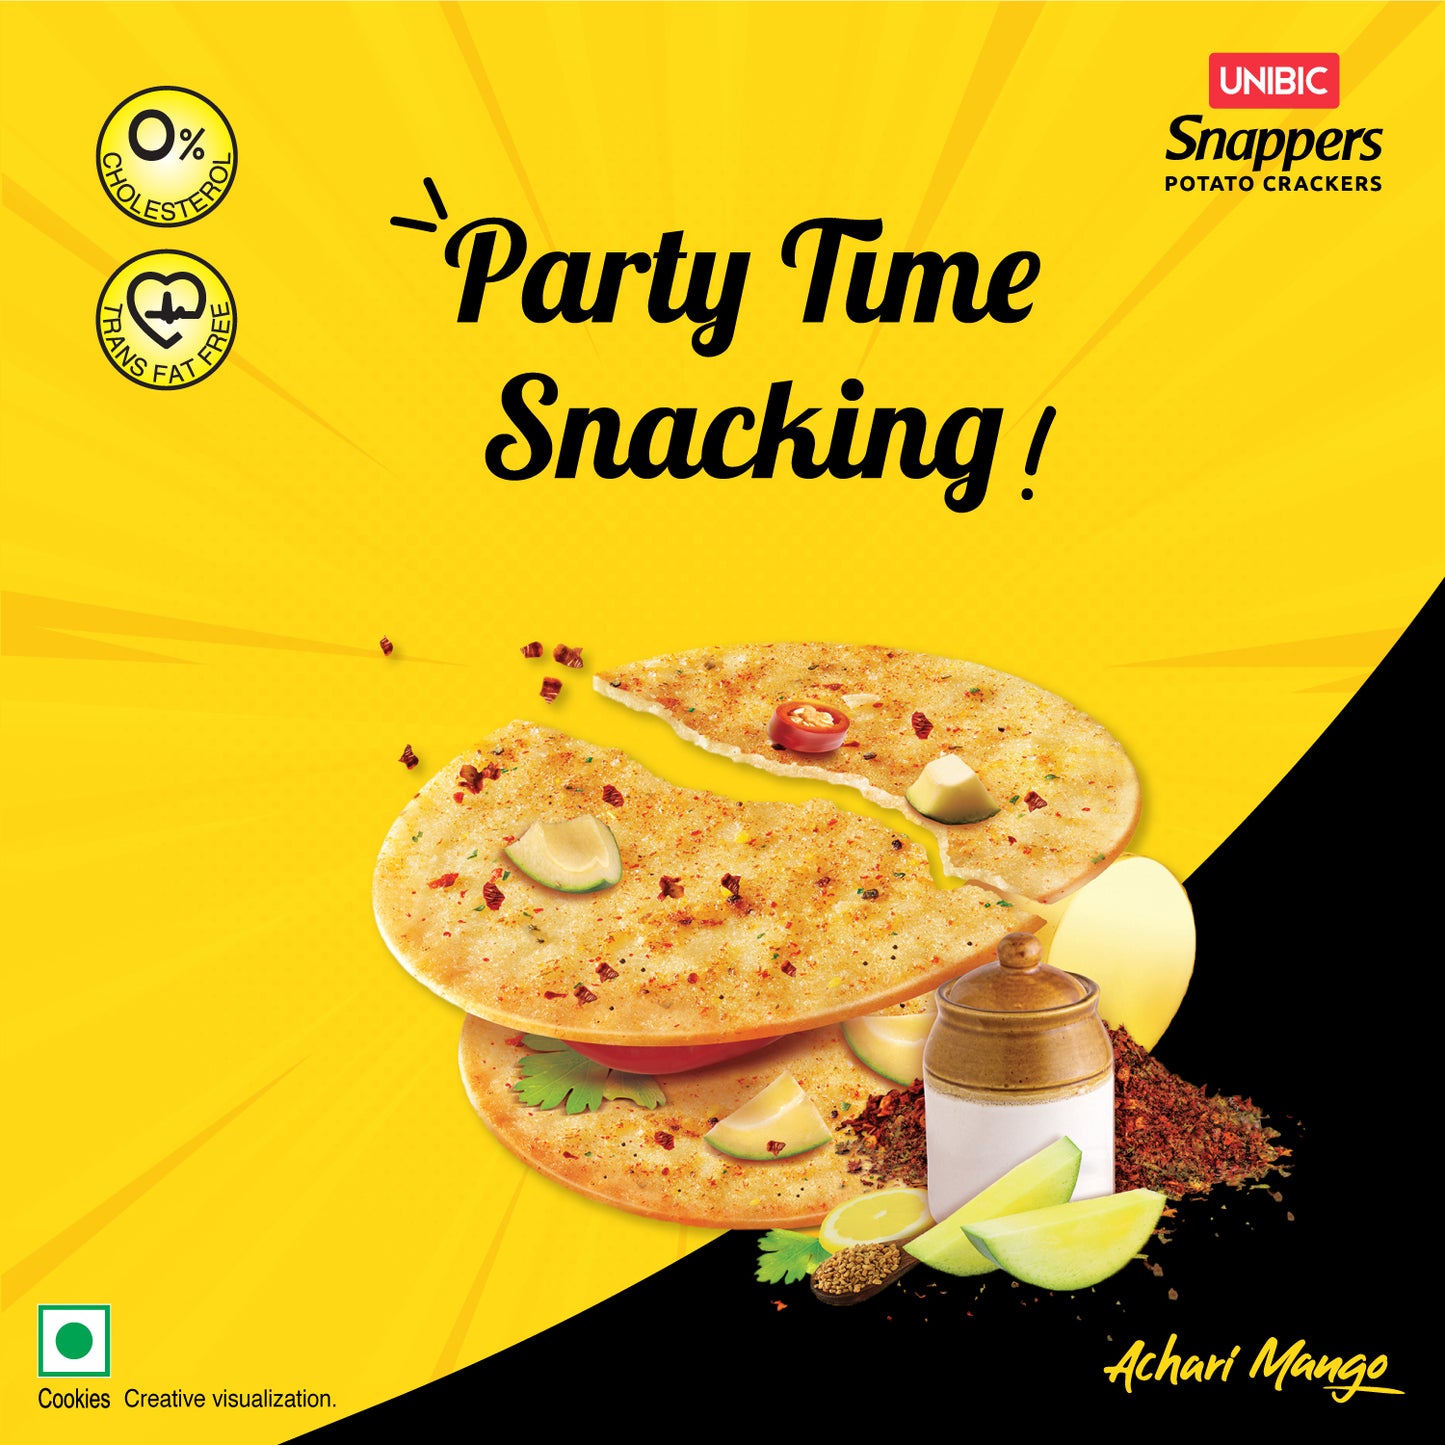 UNIBIC Snappers - Achari Flavored Potato Biscuits, 300g